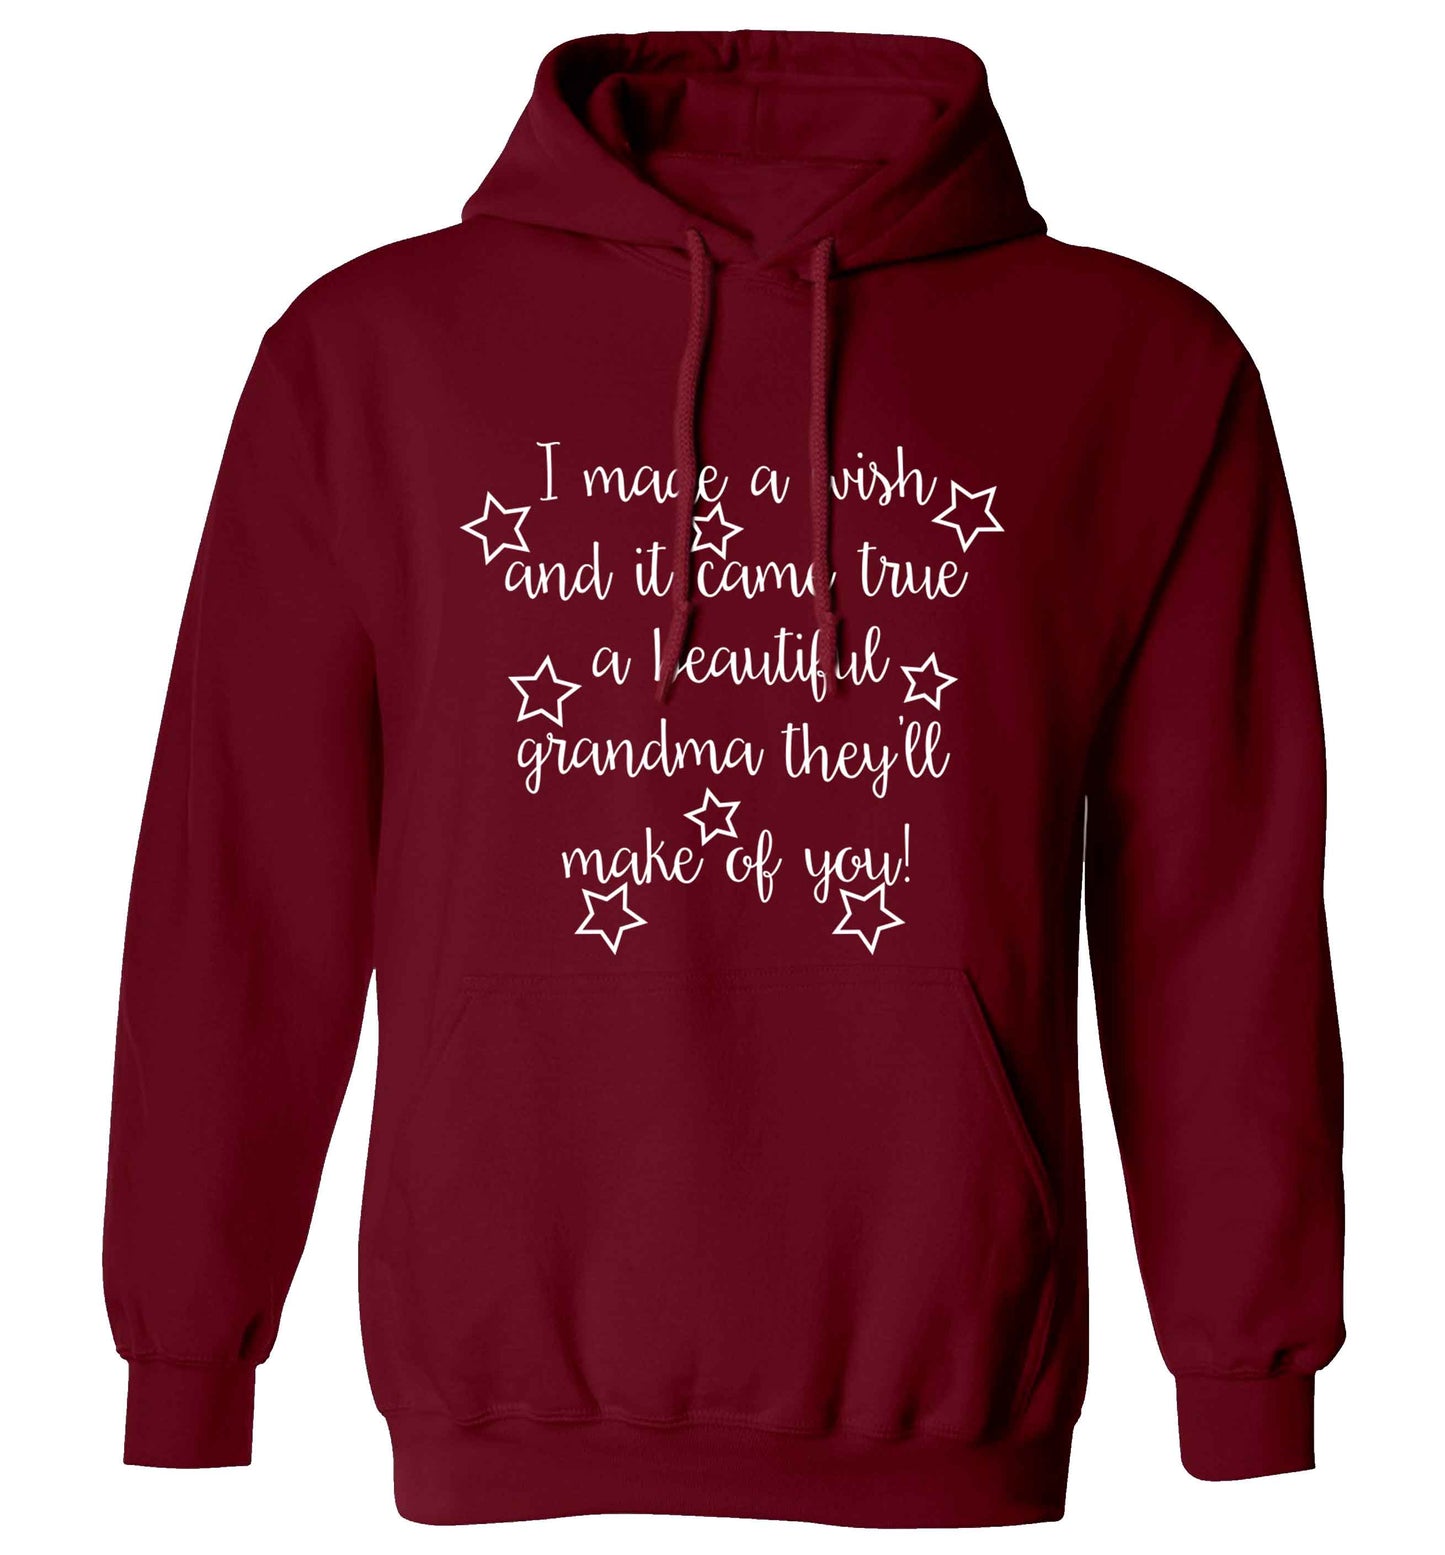 I made a wish and it came true a beautiful grandma they'll make of you! adults unisex maroon hoodie 2XL